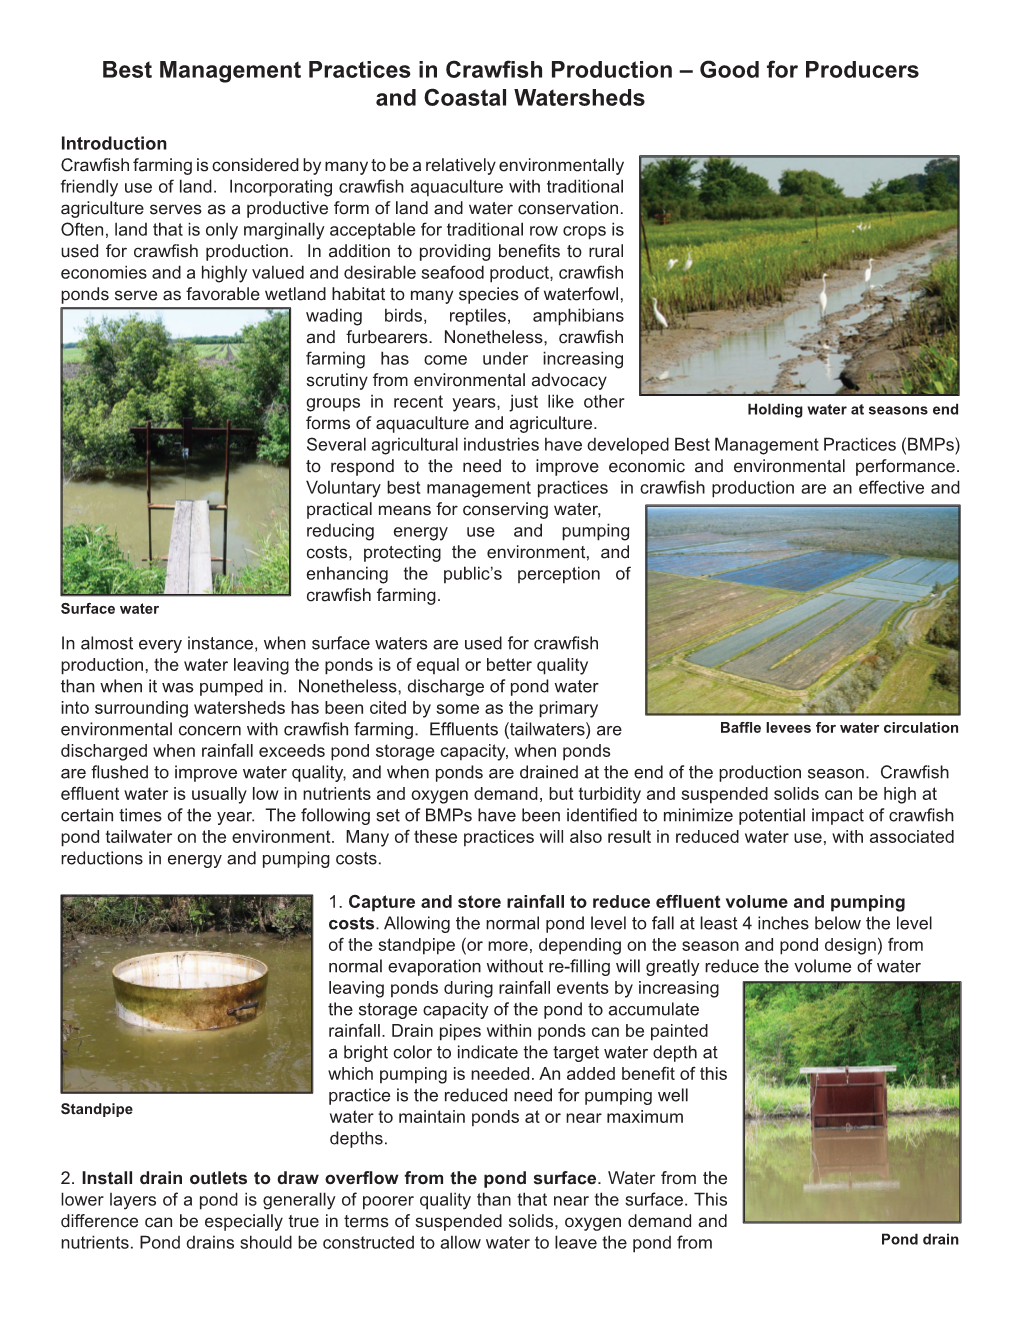 Best Management Practices in Crawfish Production – Good for Producers and Coastal Watersheds